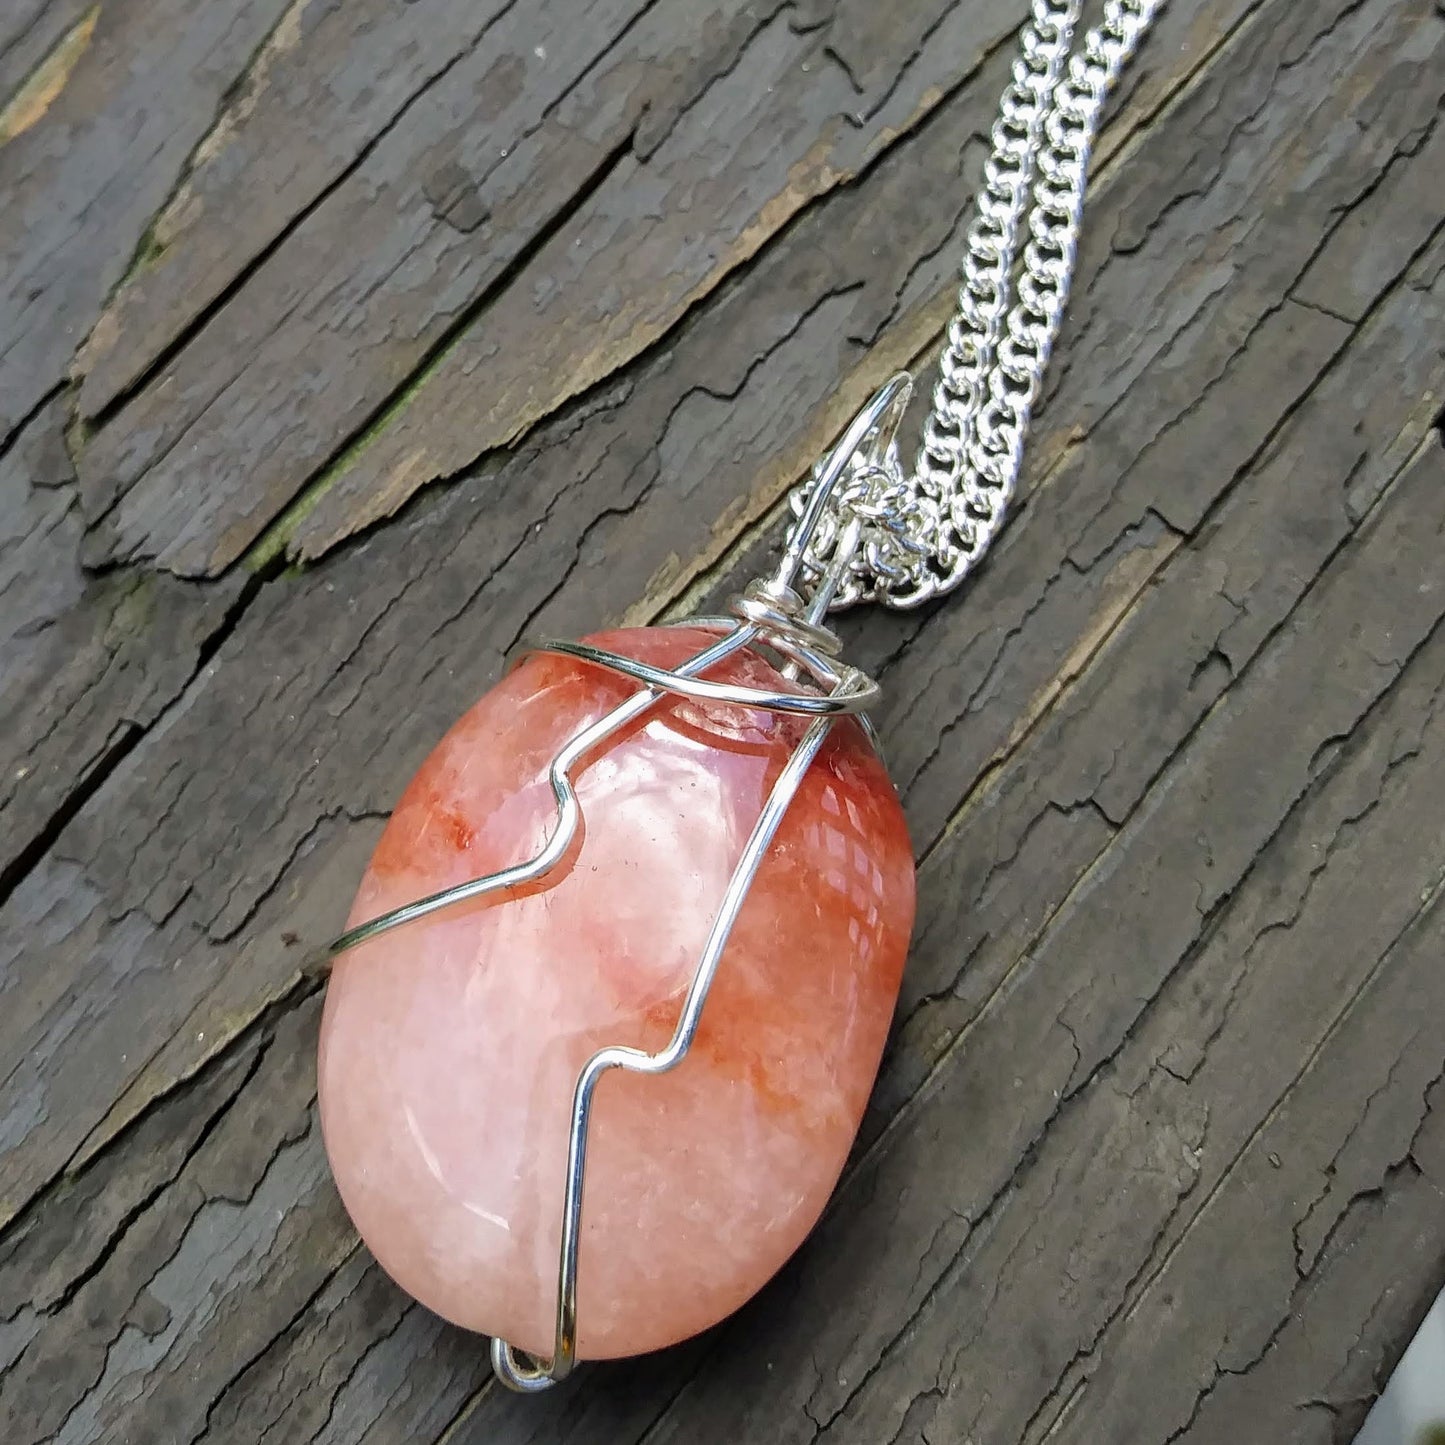 Crazy Wire Wrapped Upcycled Large Pink Gemstone Pendant